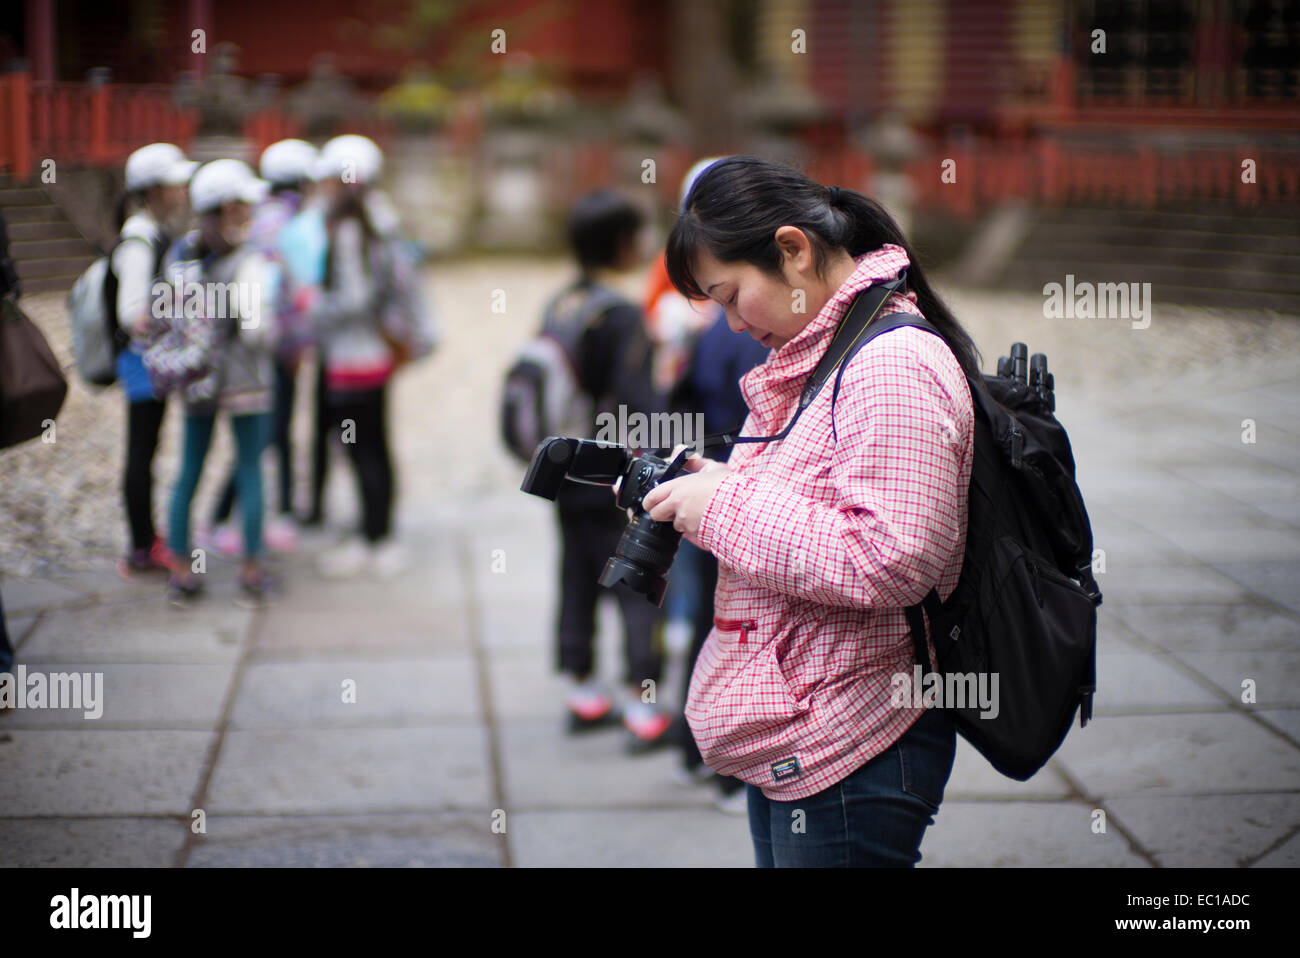 A tourist checks the image on the back of her camera, Nikko, Japan. Stock Photo